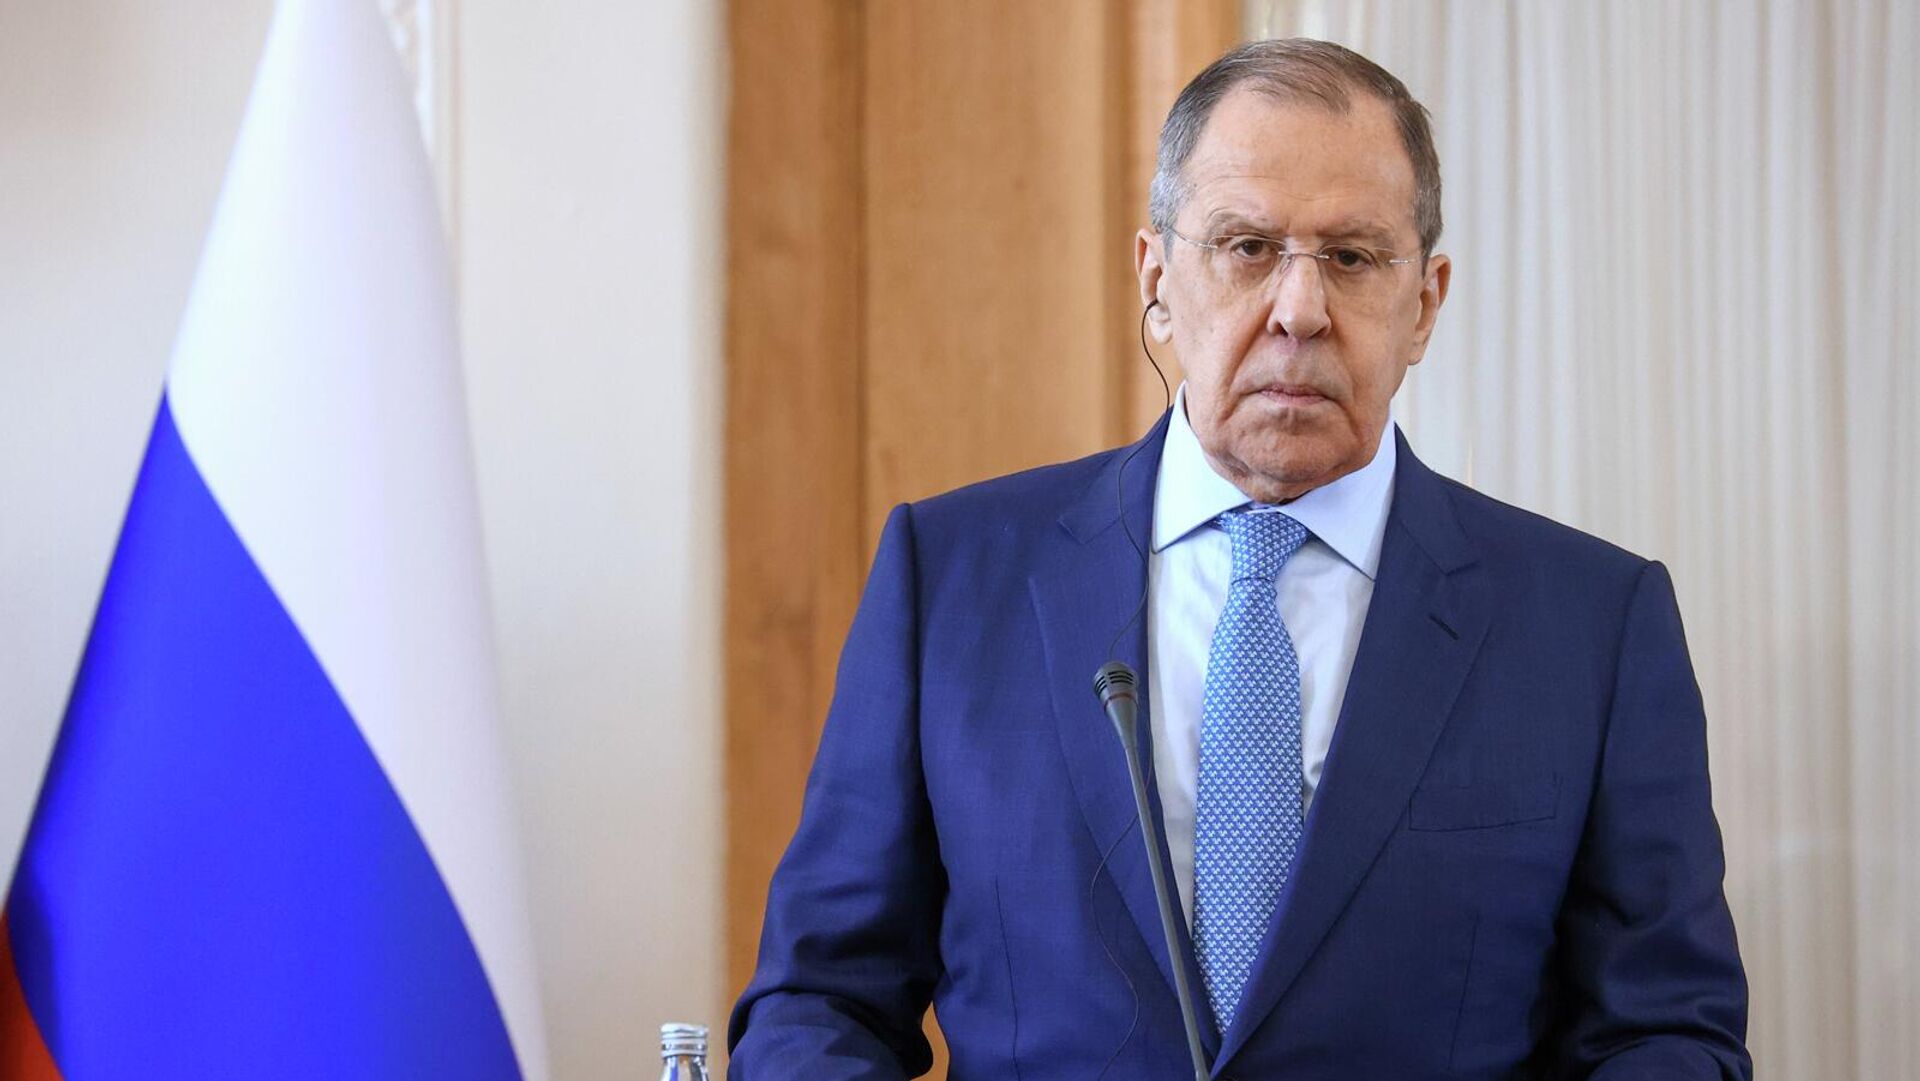 Europe is starting to realize that security without Russia, Belarus is impossible: Lavrov